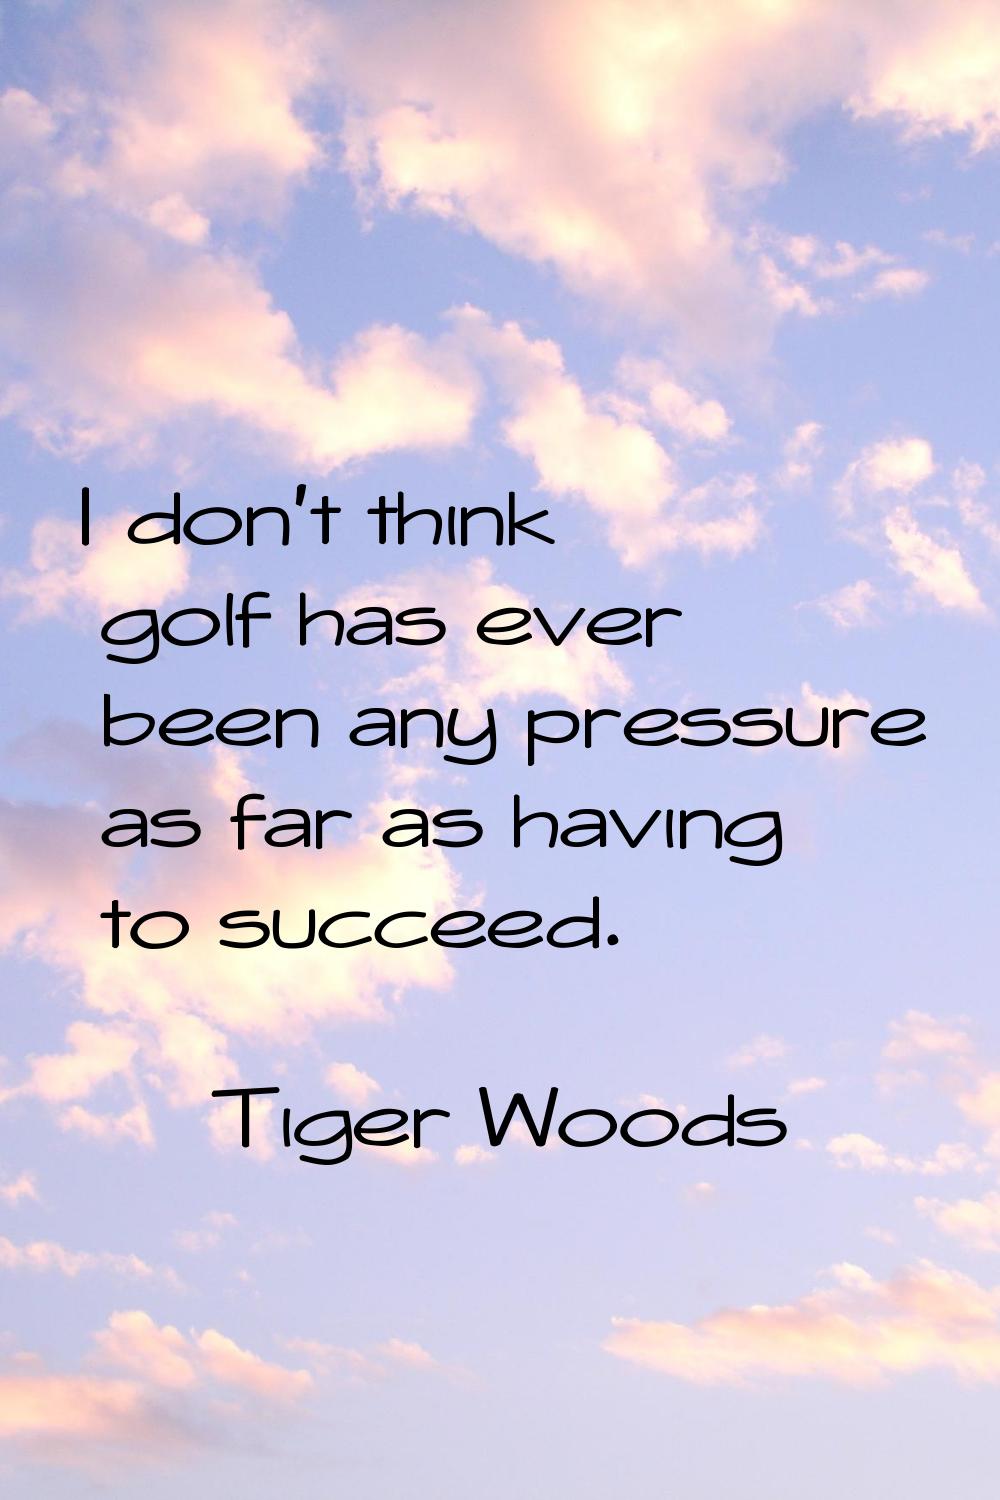 I don't think golf has ever been any pressure as far as having to succeed.